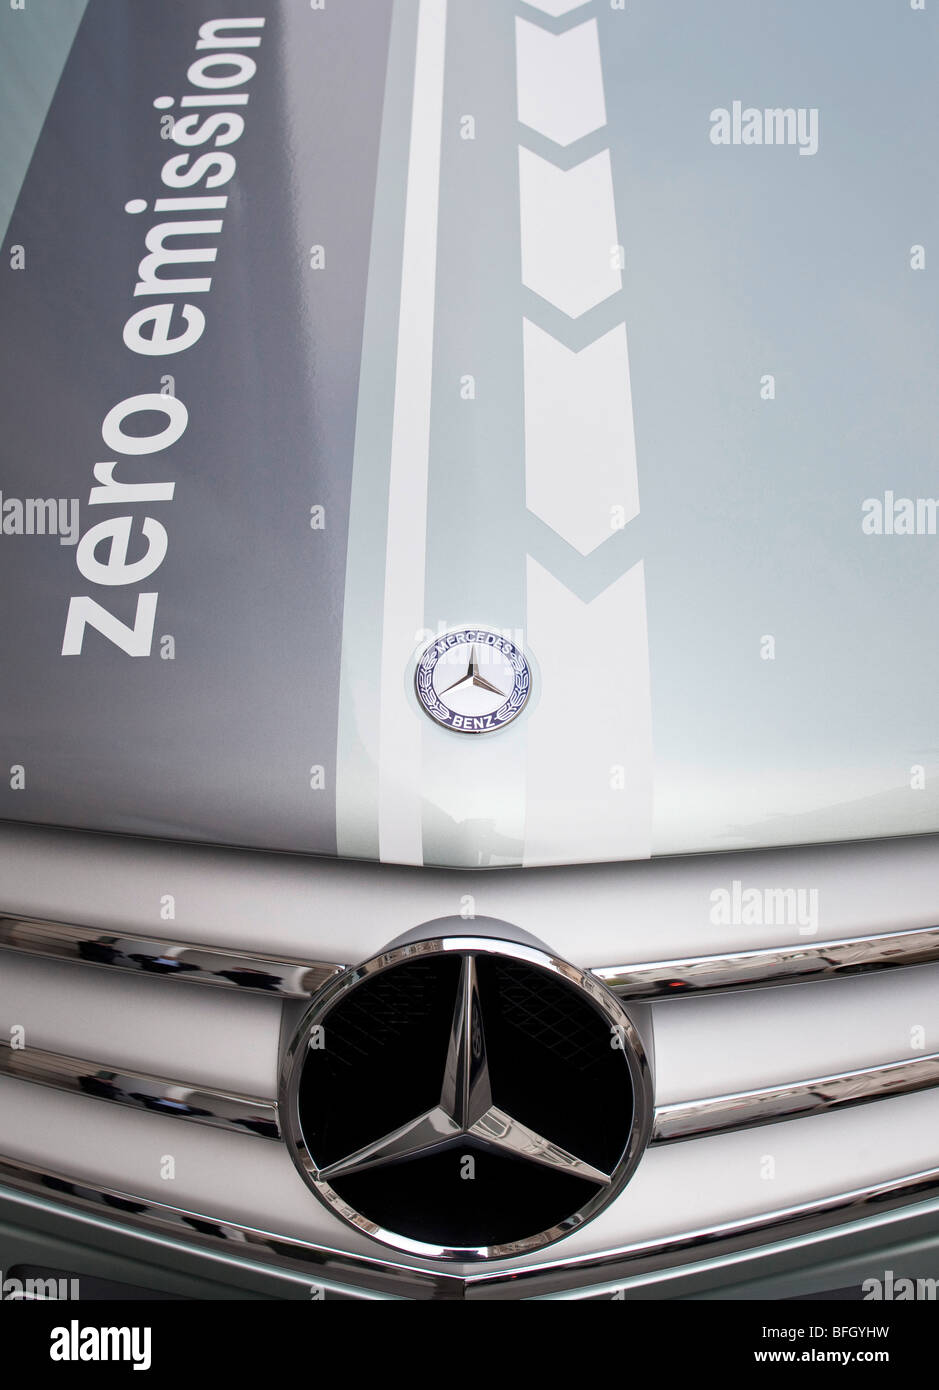 Mercedes B-class , hydrogen fuel cell vehicle |. Stock Photo